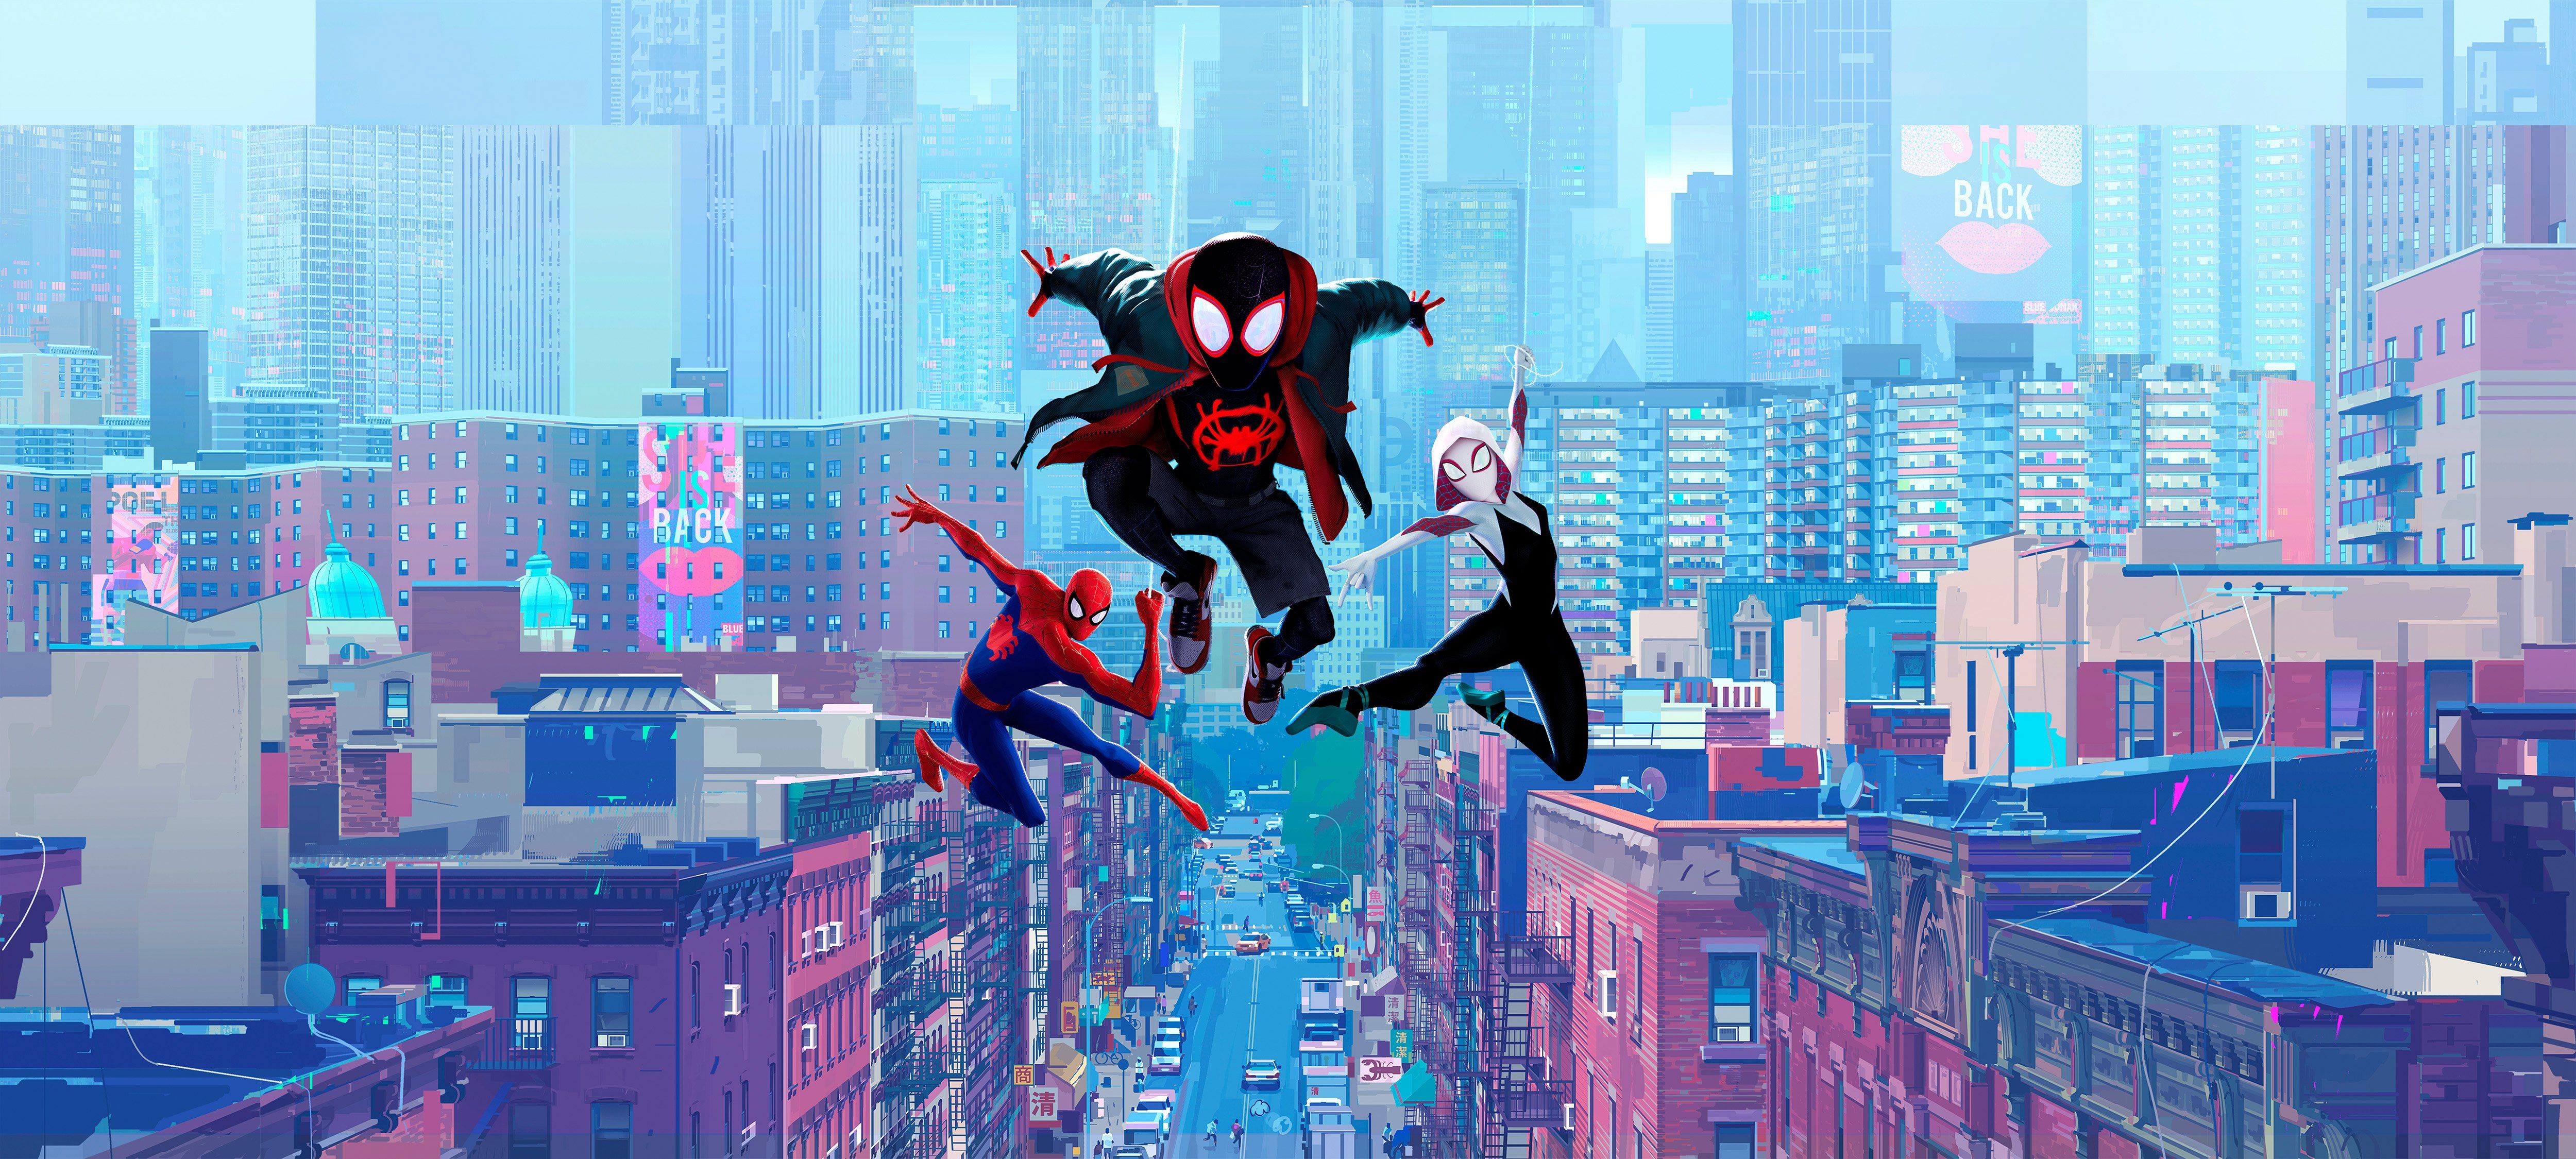 Spider Verse 4K Wallpaper For Your Desktop Or Mobile Screen Free And Easy To Download